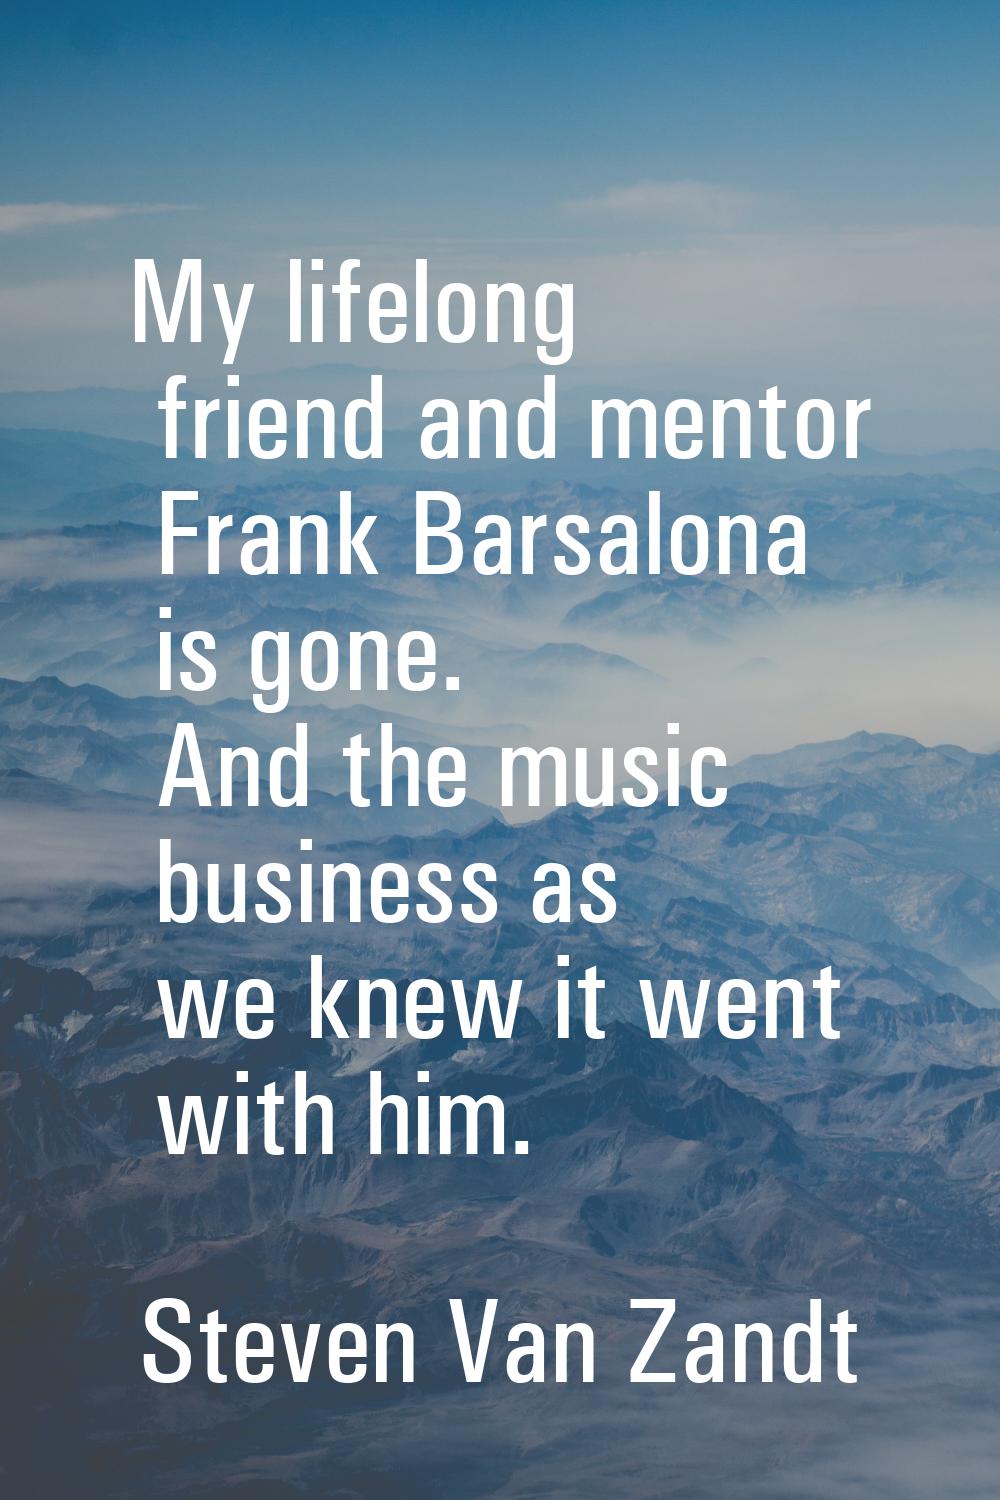 My lifelong friend and mentor Frank Barsalona is gone. And the music business as we knew it went wi